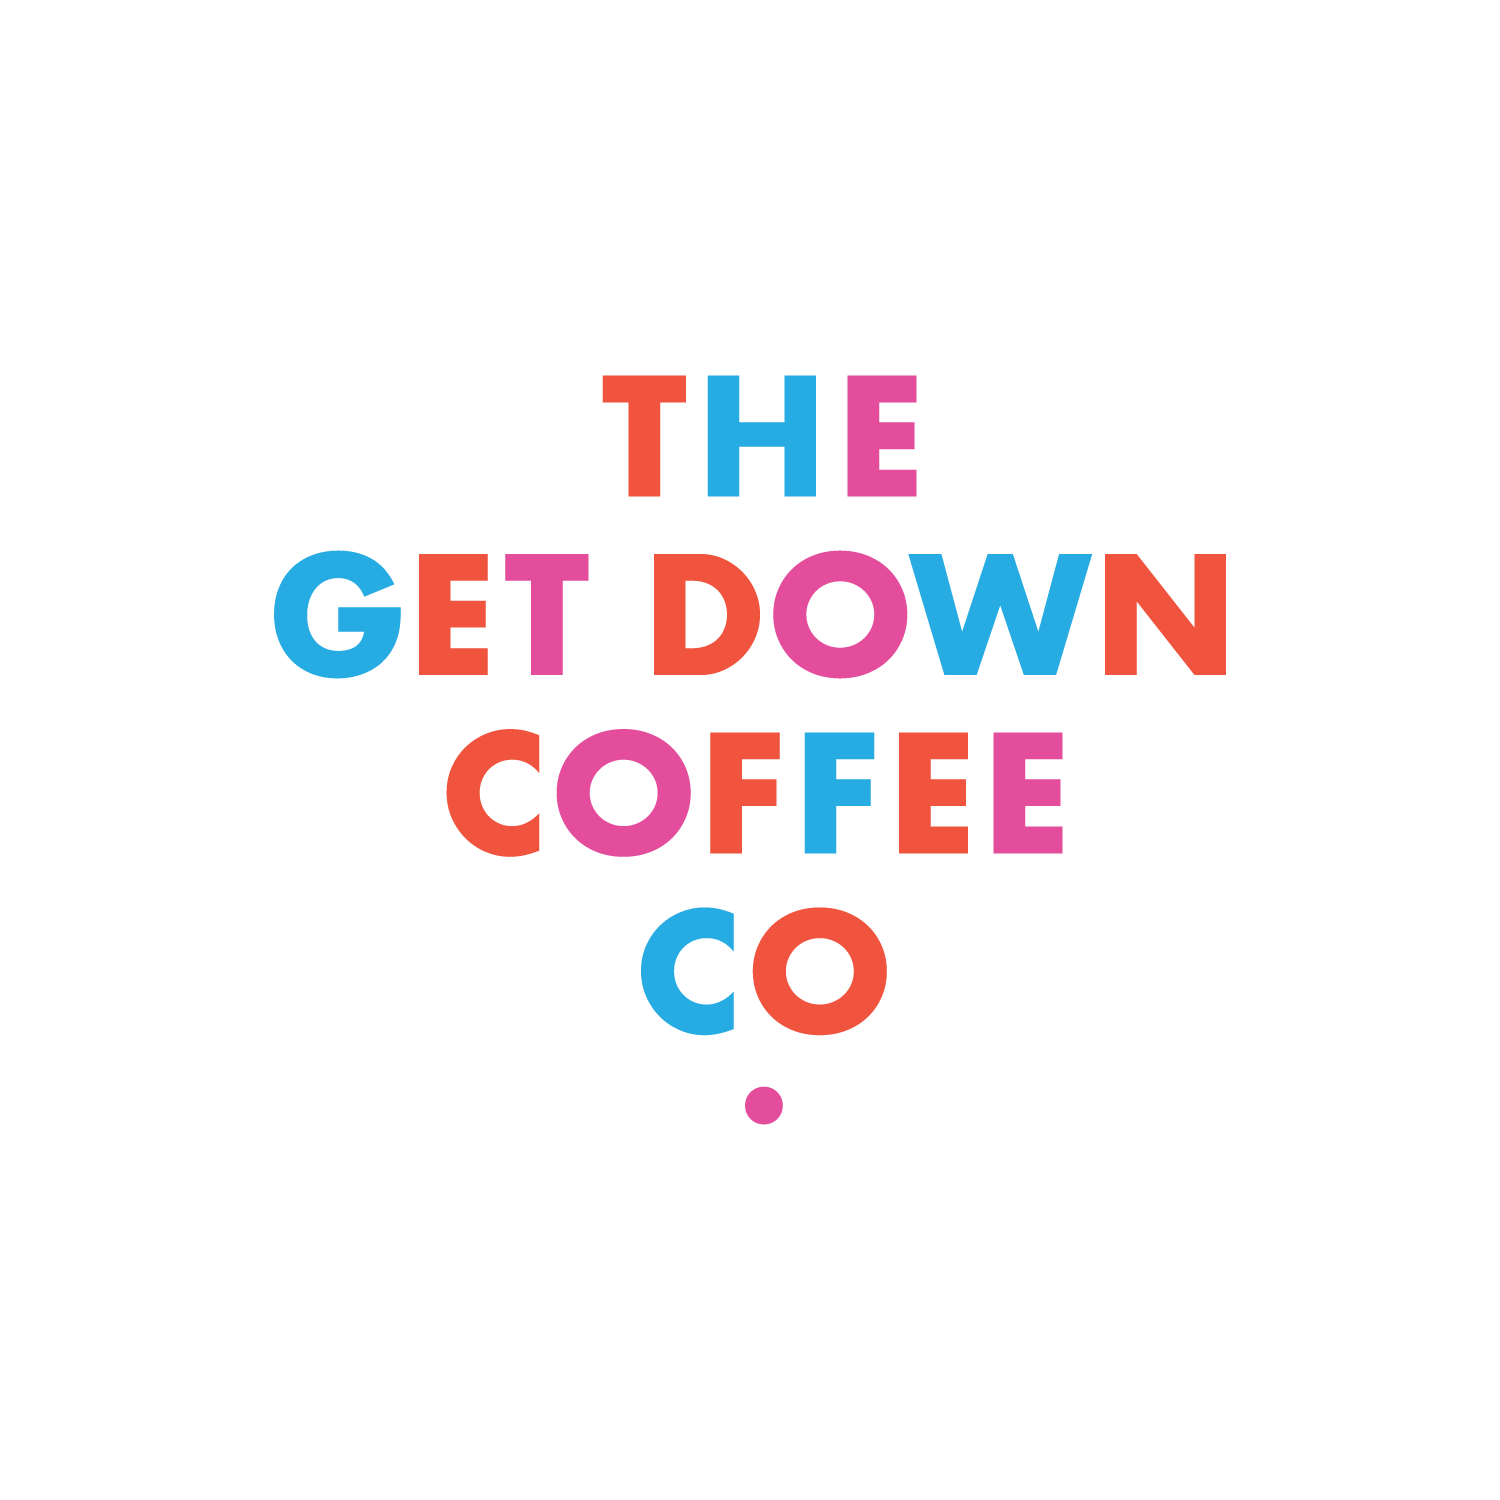 The Get Down Coffee Co